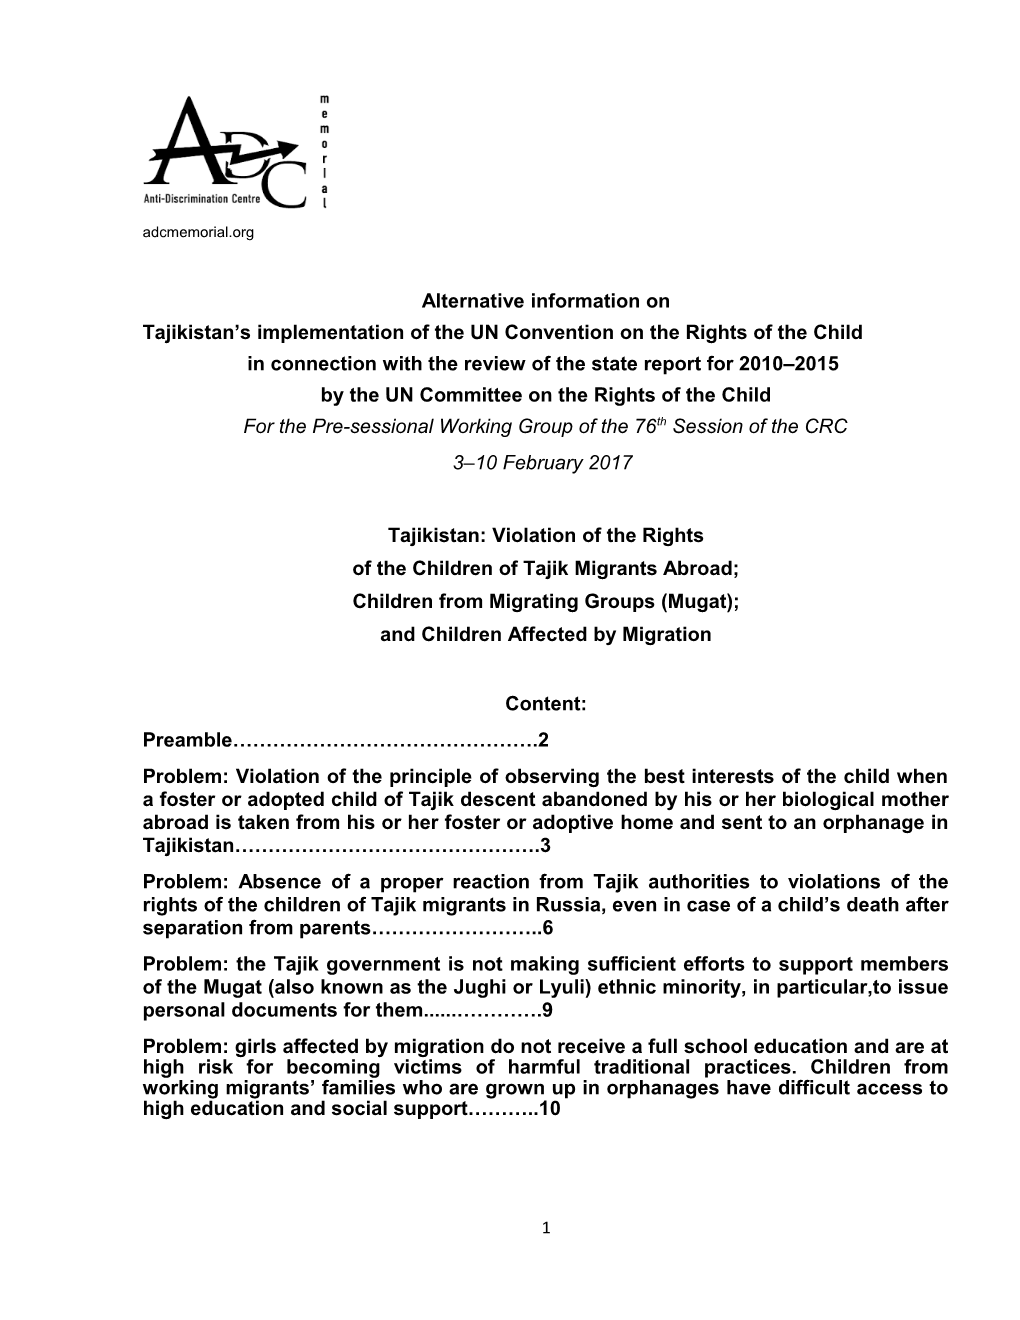 Tajikistan Simplementation of the UN Convention on the Rights of the Child